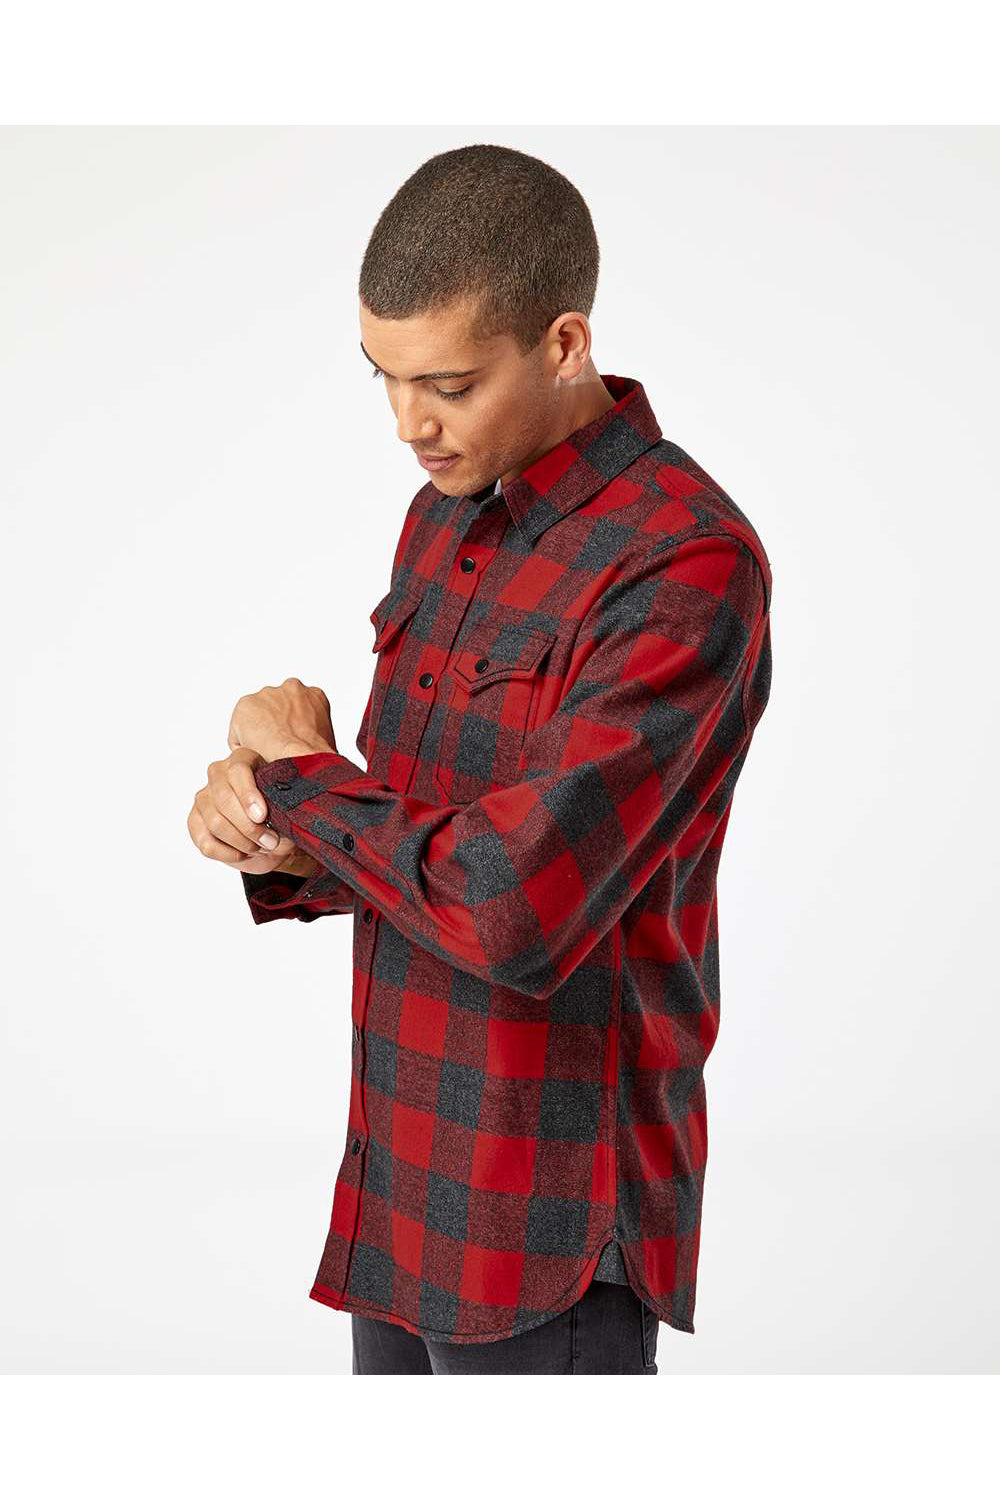 Burnside 8219 Mens Plaid Flannel Long Sleeve Snap Down Shirt w/ Double Pockets Red/Heather Black Model Side